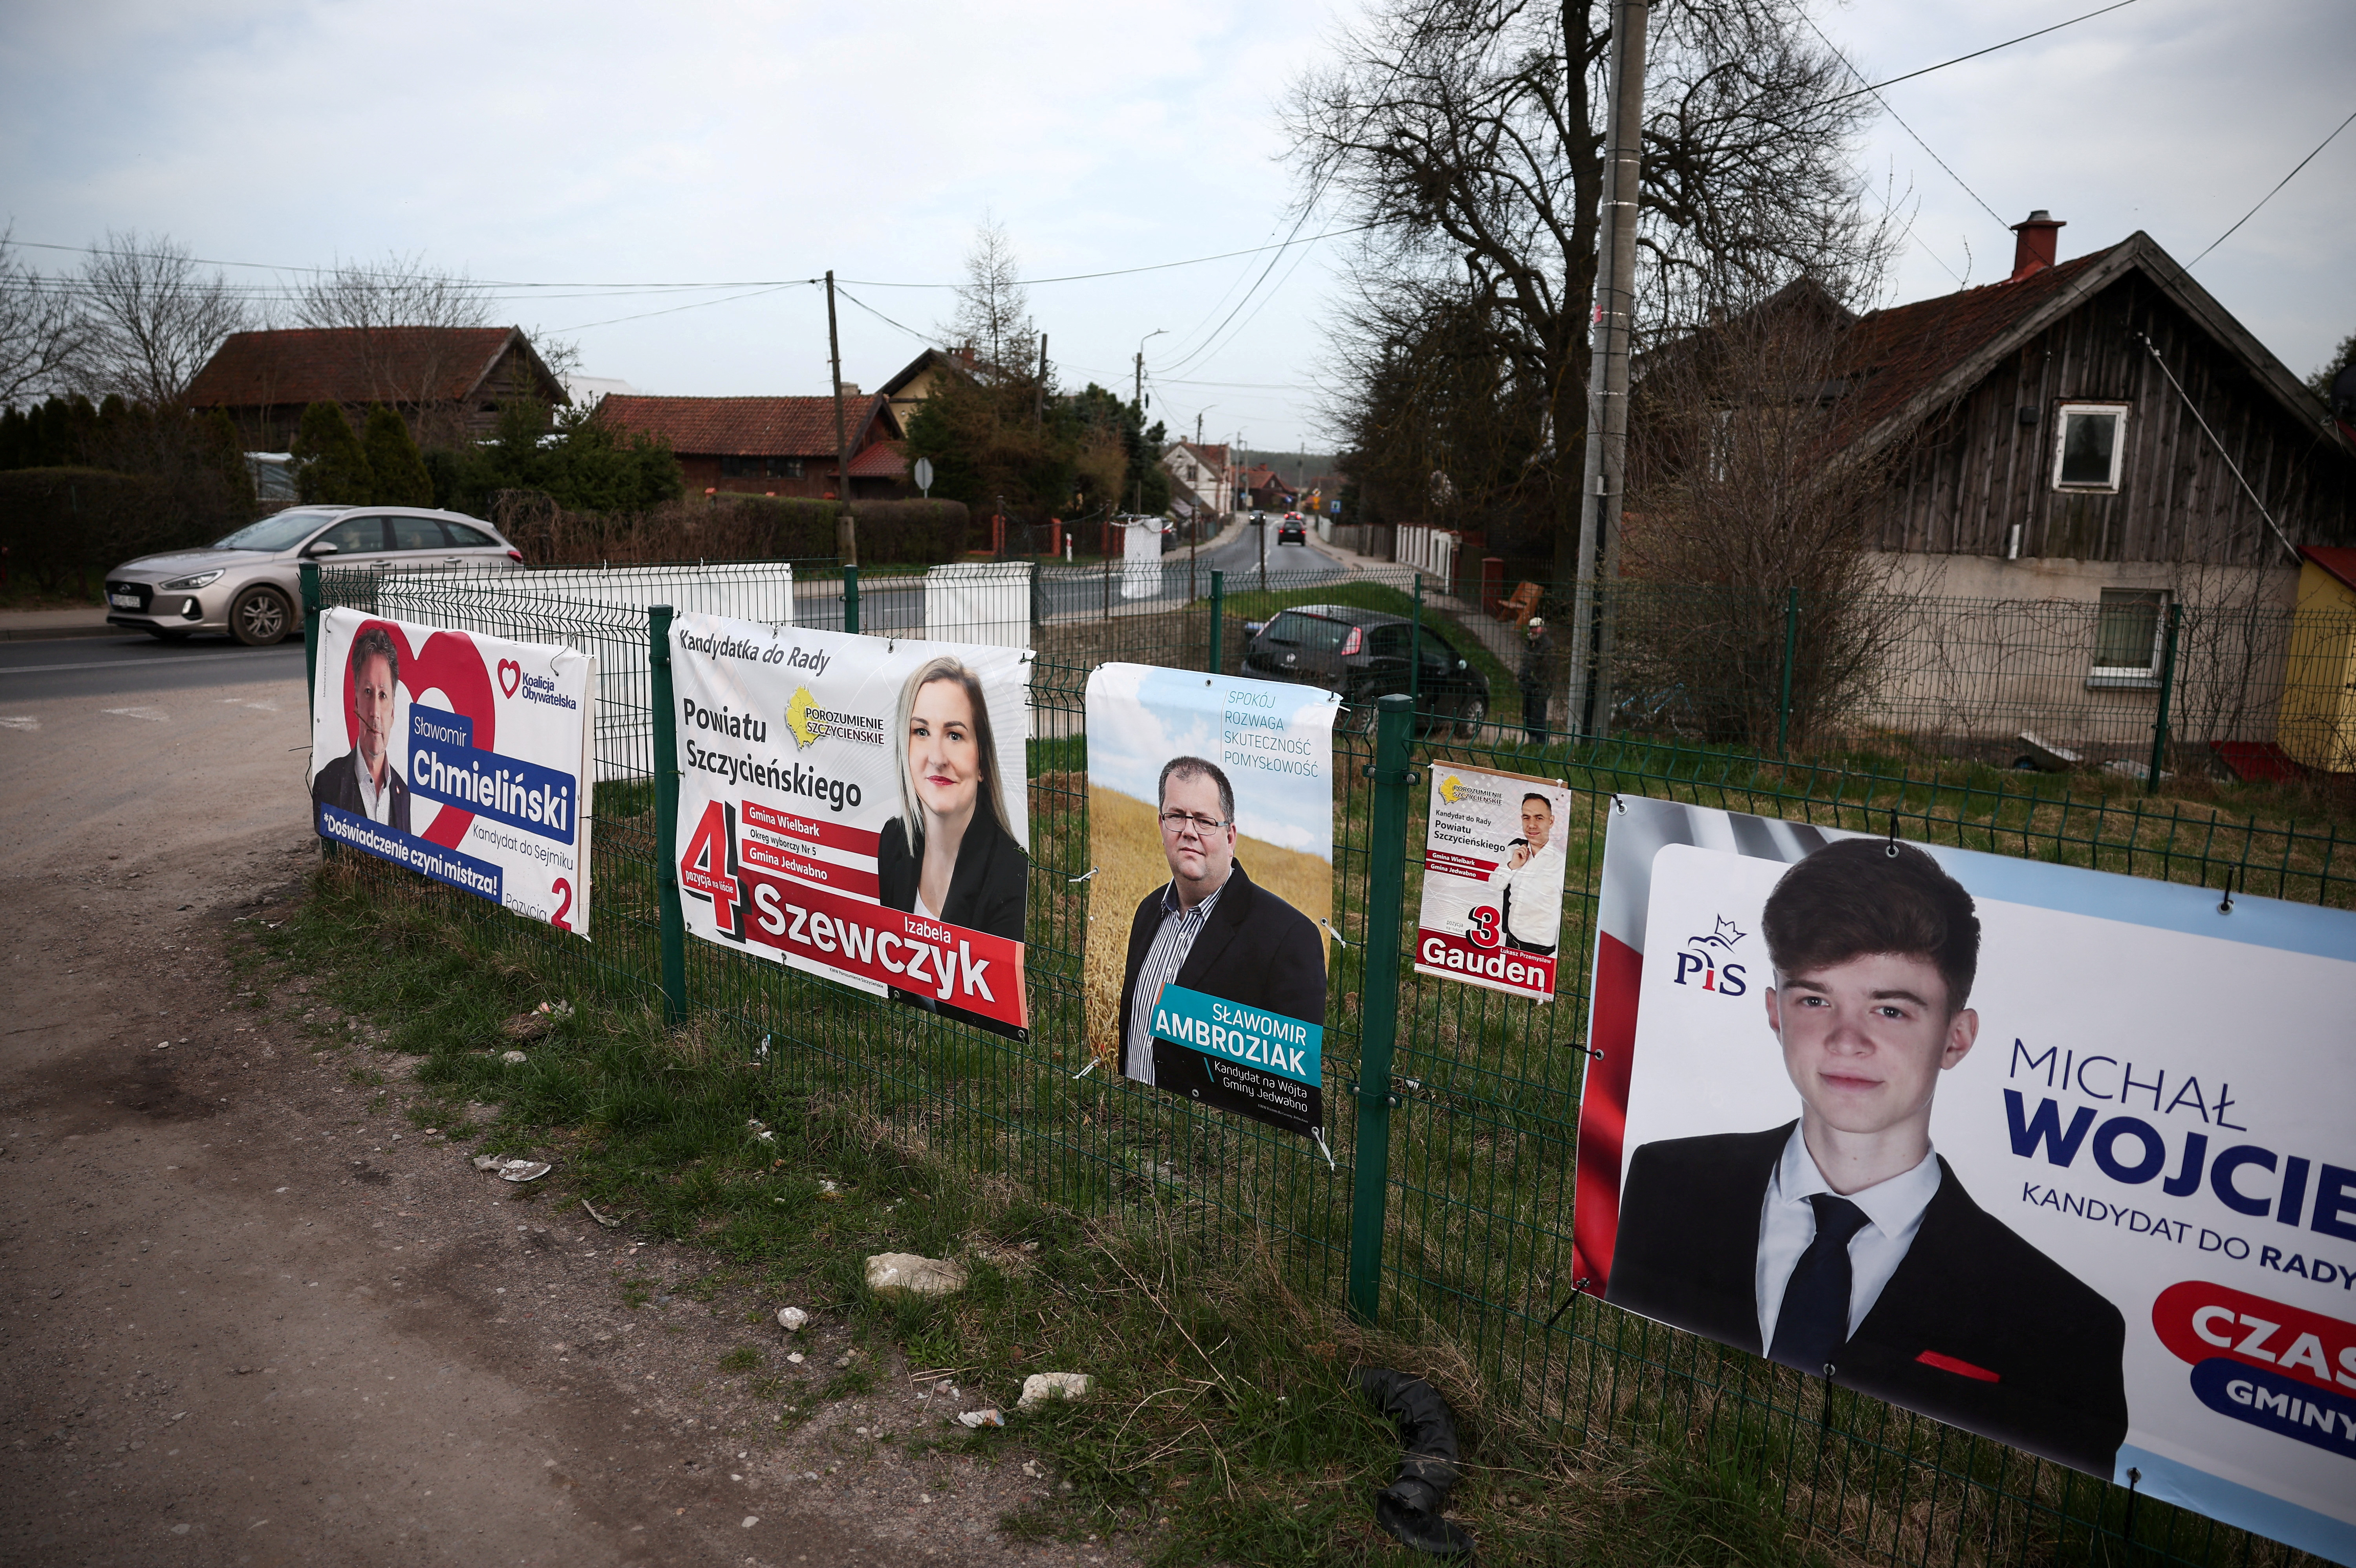 Election posters are seen hanging on the fence ahead of next weekend Polish local elections, in Jedwabno